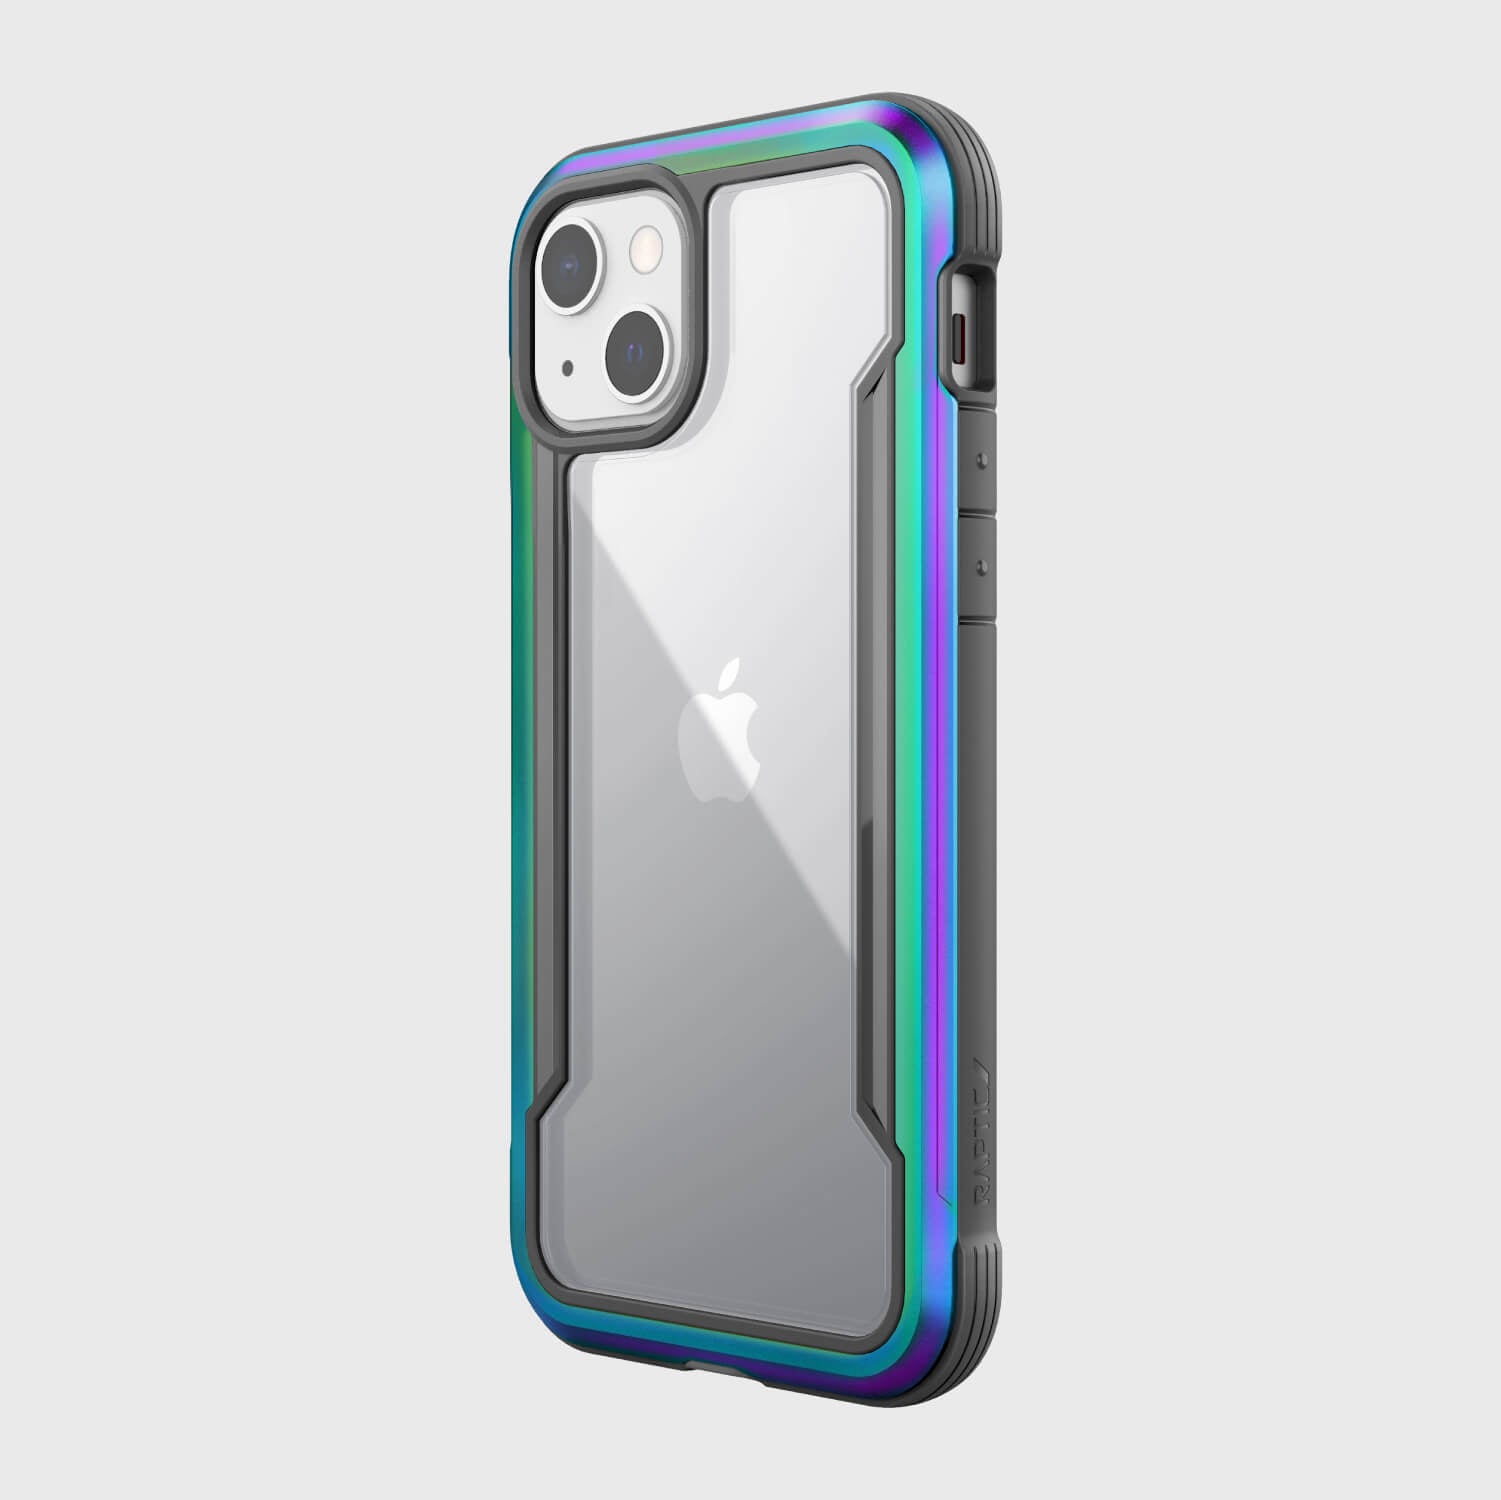 The Raptic SHIELD PRO iPhone 13 case offers drop protection and features a rainbow colored back.